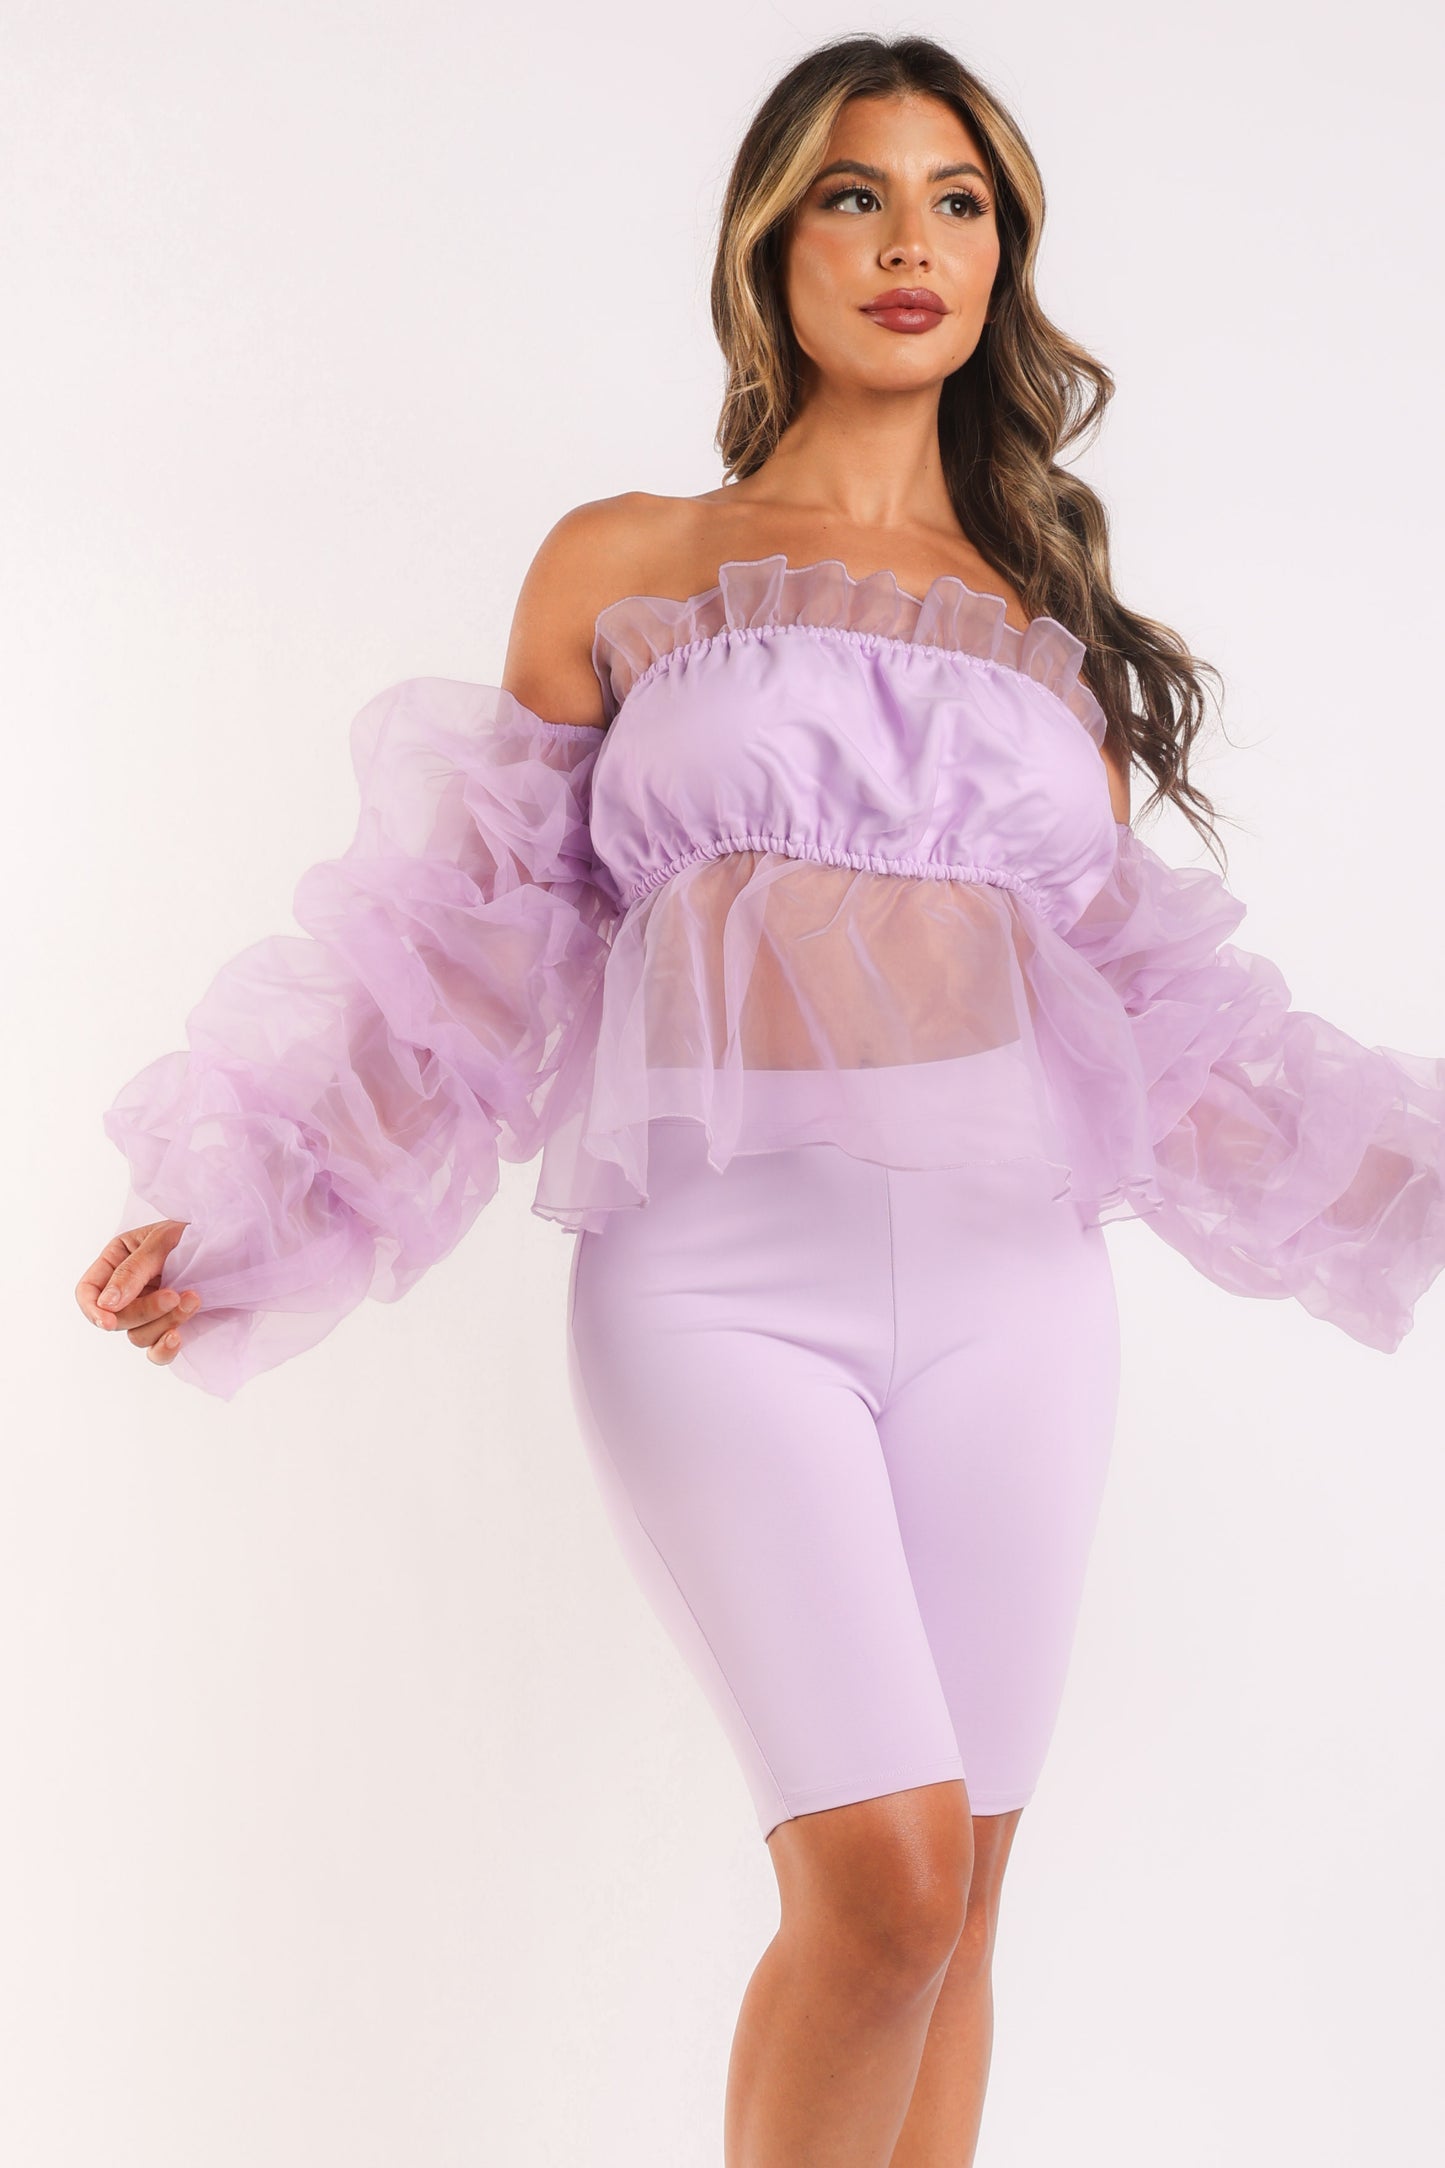 Sexy Organza Sleeve Detailed Top & Matching Shorts 2 Piece Set lavndr